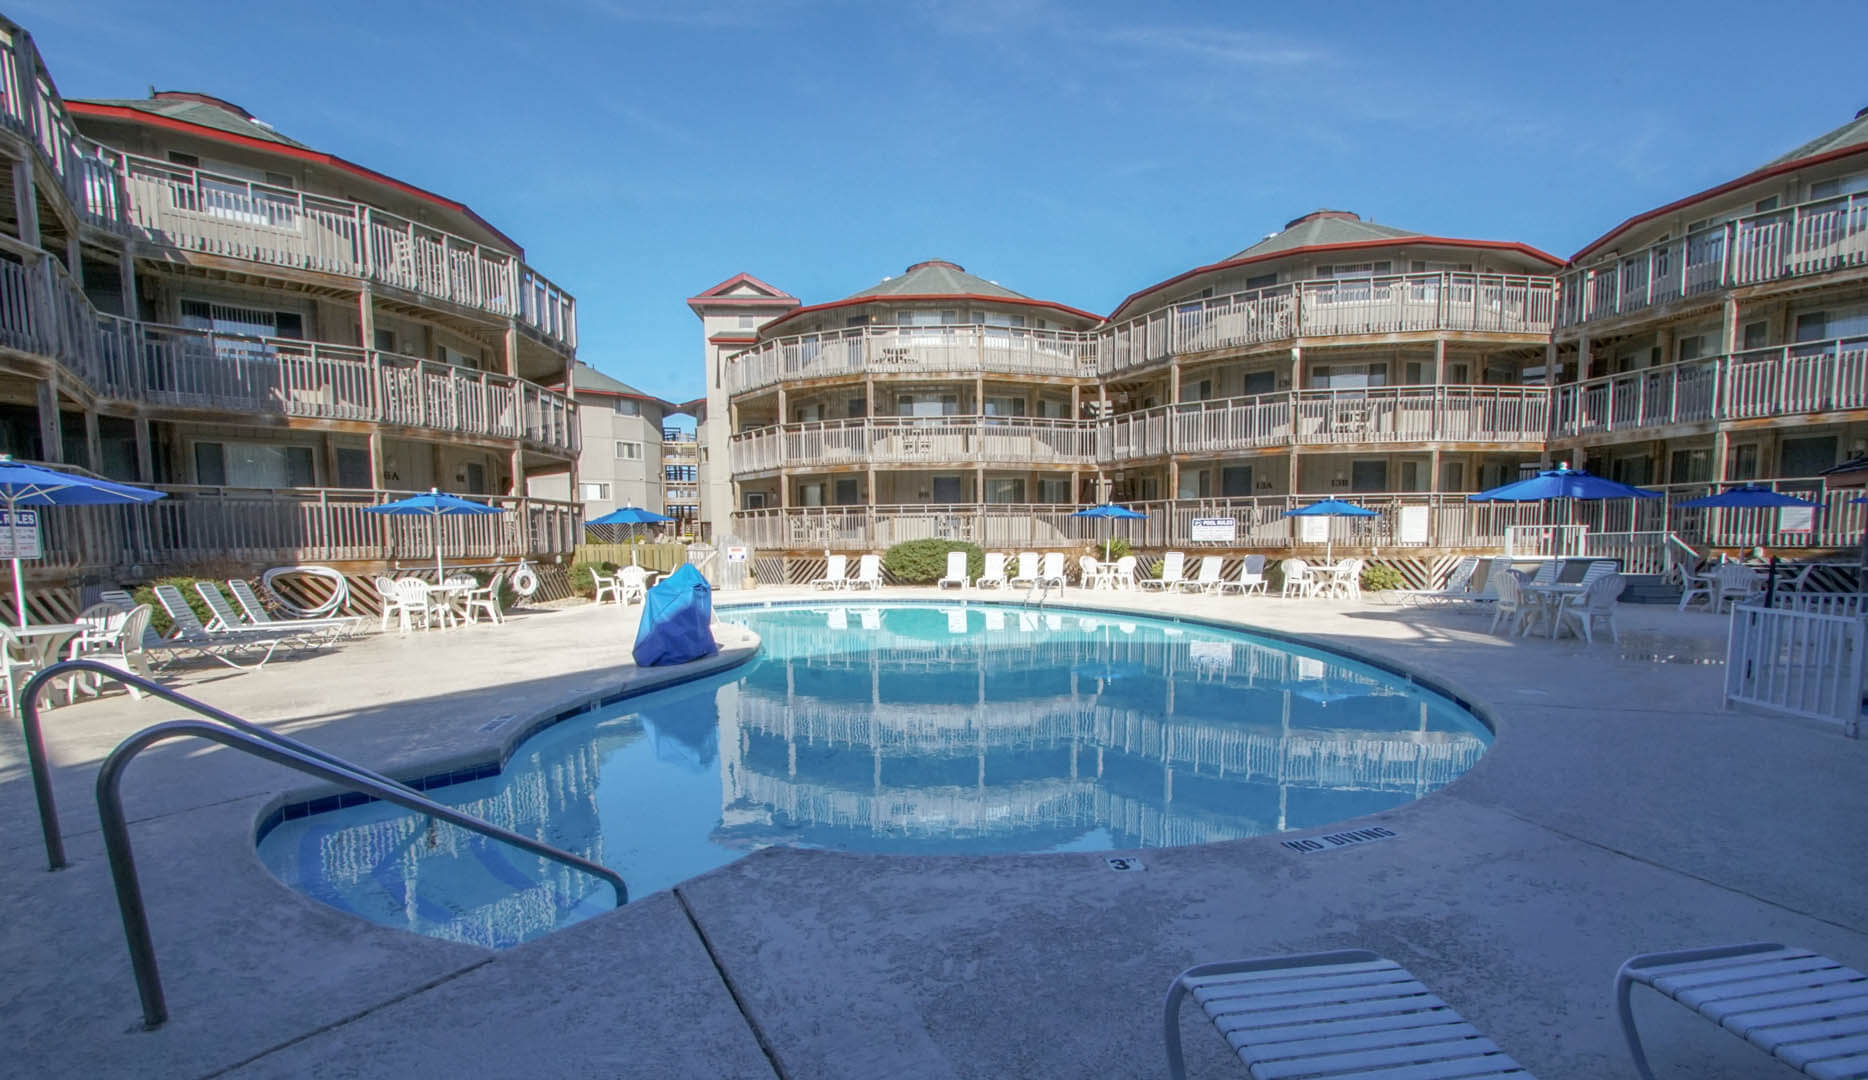 A stoic view of the accommodations at VRI's Outer Banks Beach Club in North Carolina.